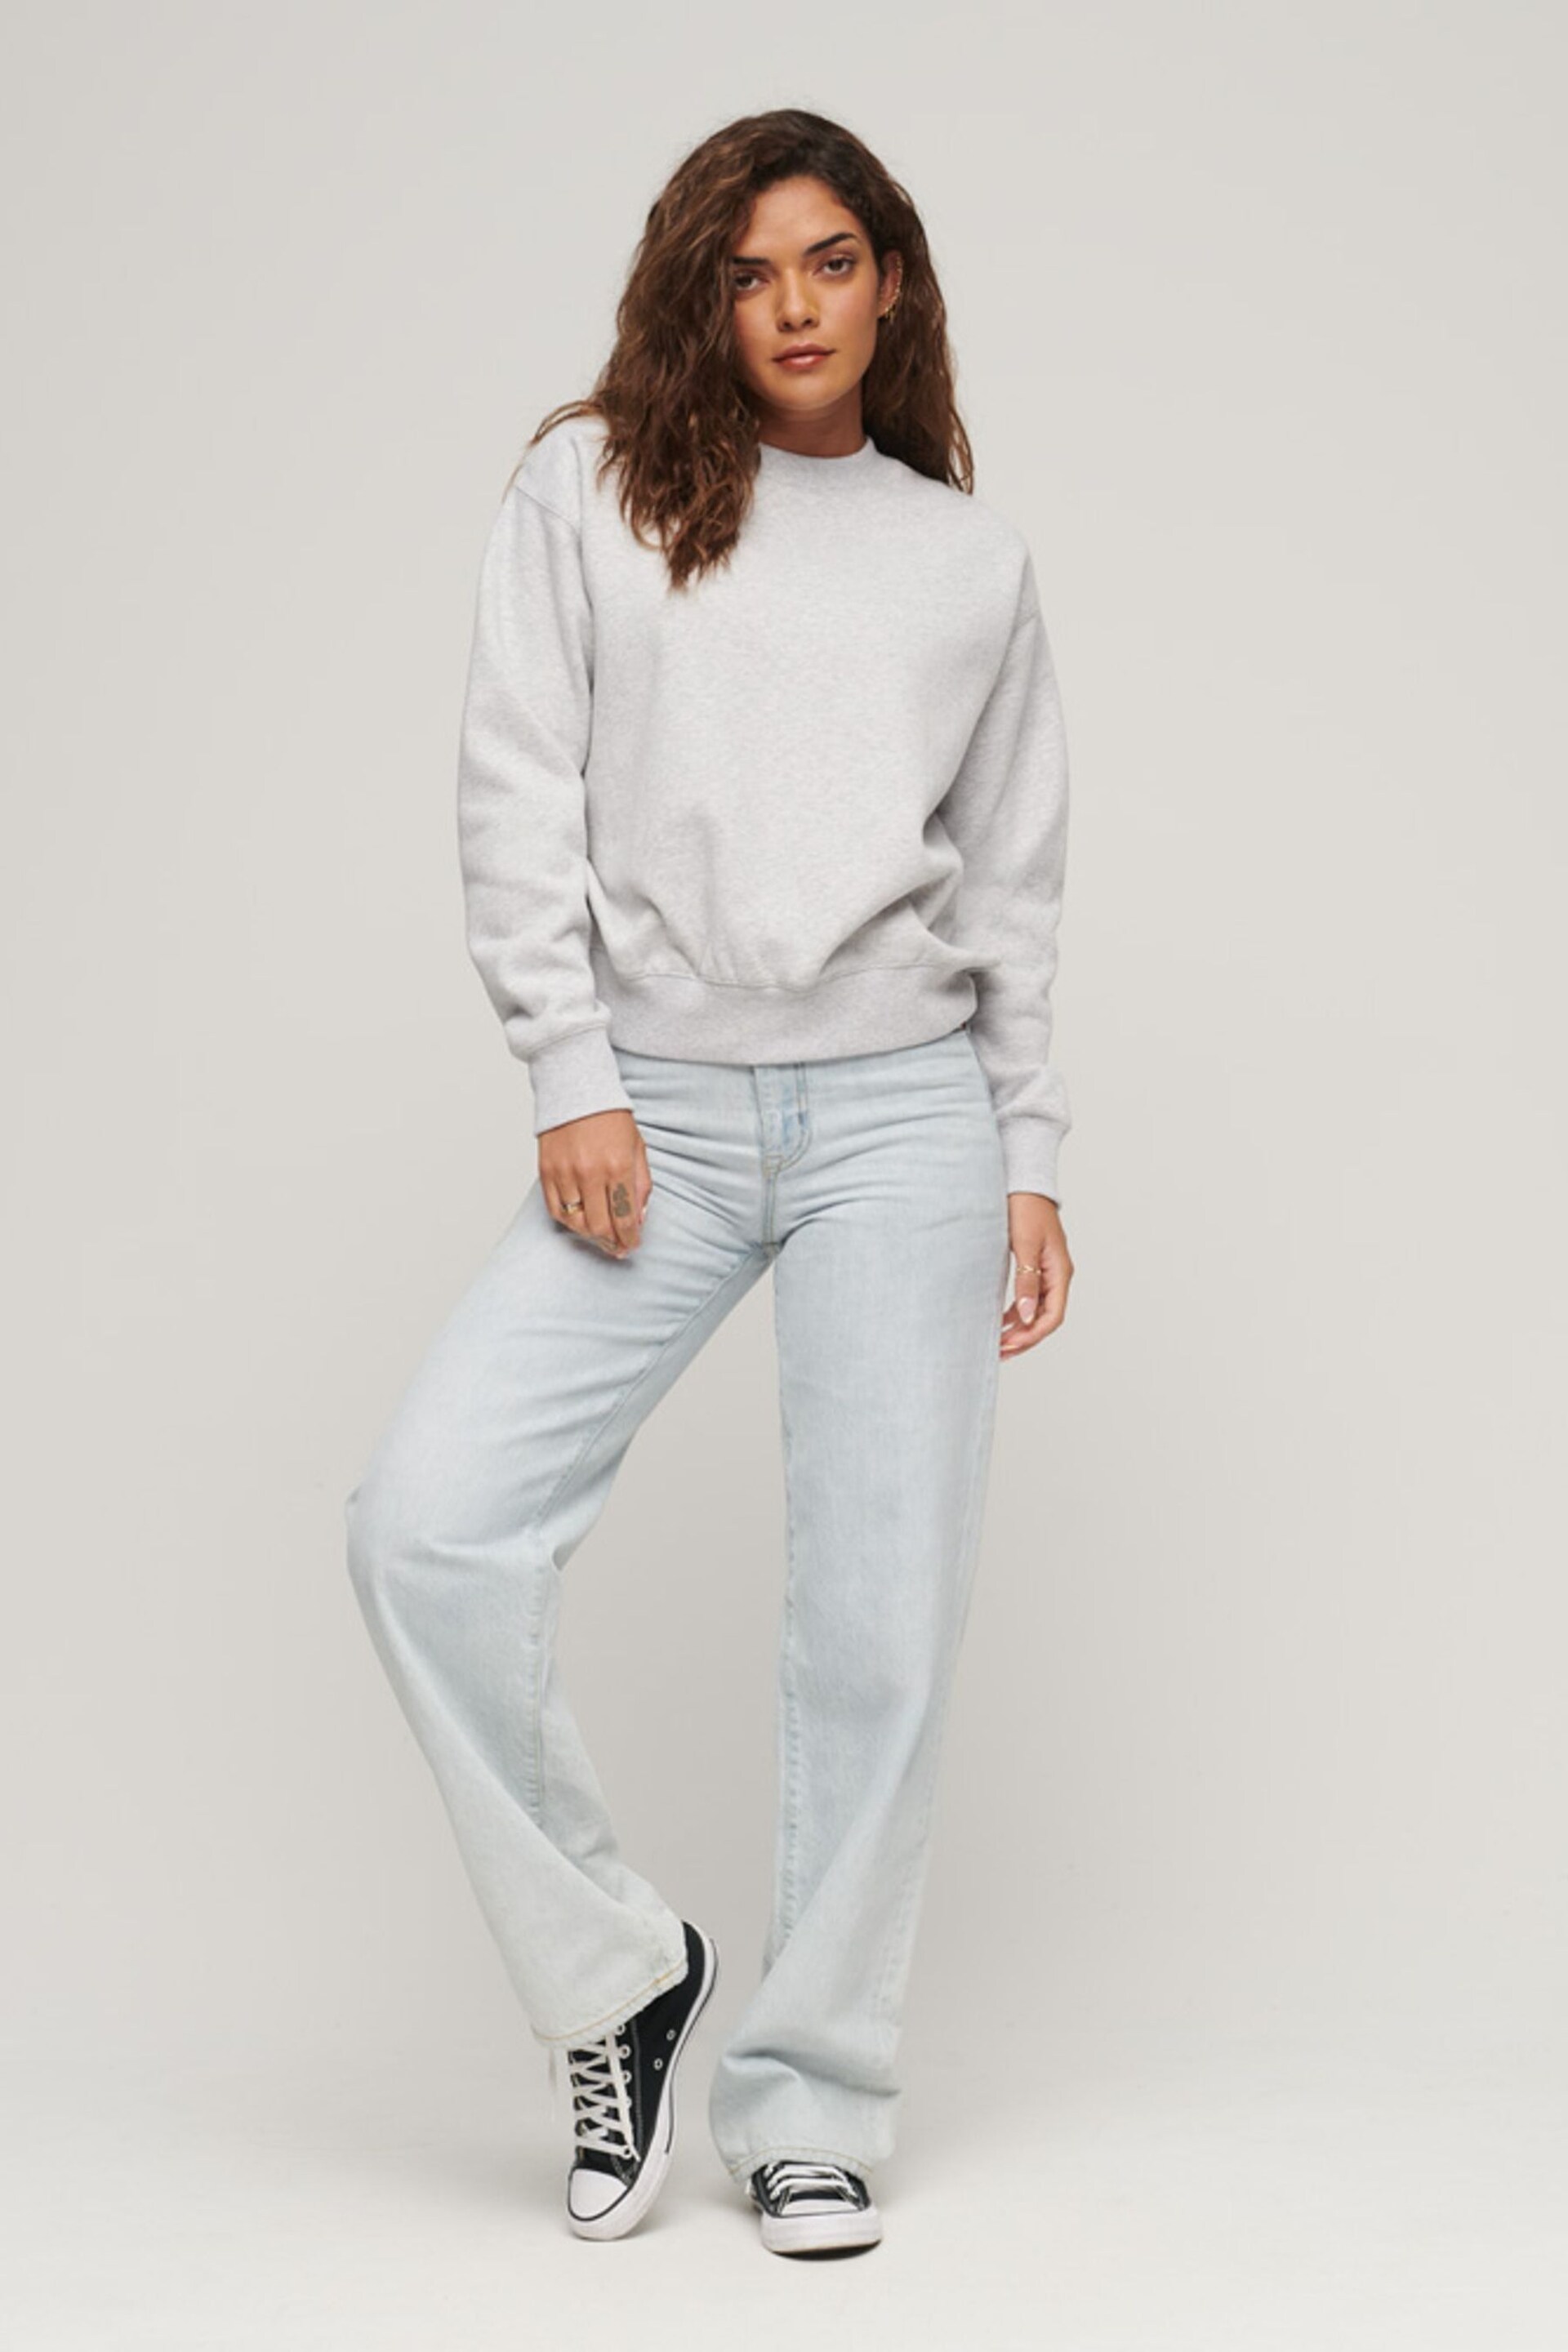 Superdry Grey Essential Logo Relaxed Fit Sweatshirt - Image 2 of 5